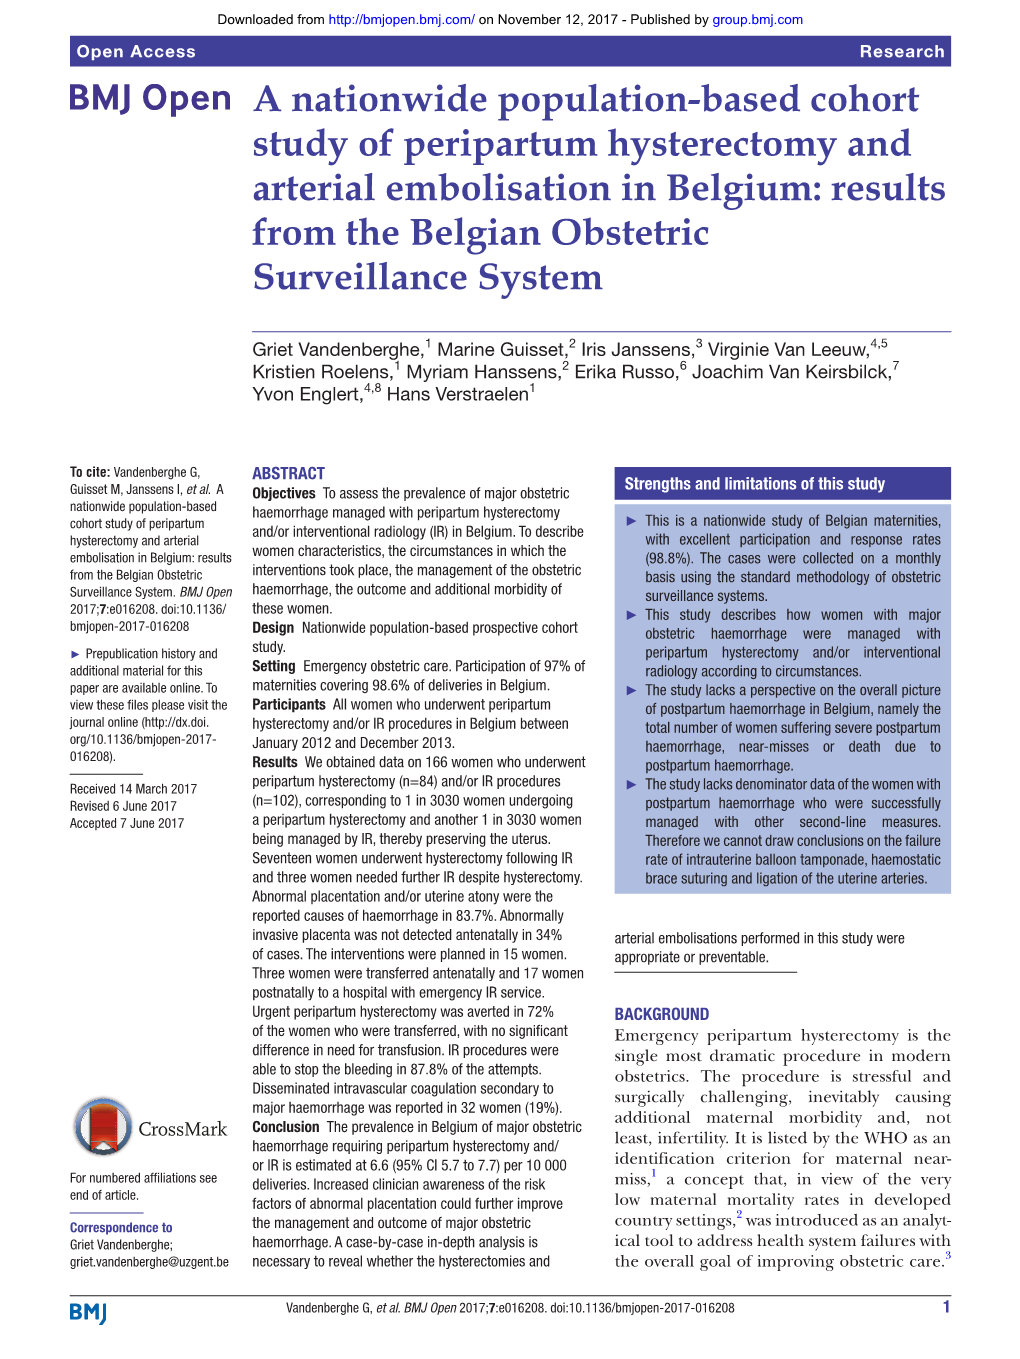 A Nationwide Population-Based Cohort Study of Peripartum Hysterectomy and Arterial Embolisation in Belgium: Results from the Belgian Obstetric Surveillance System